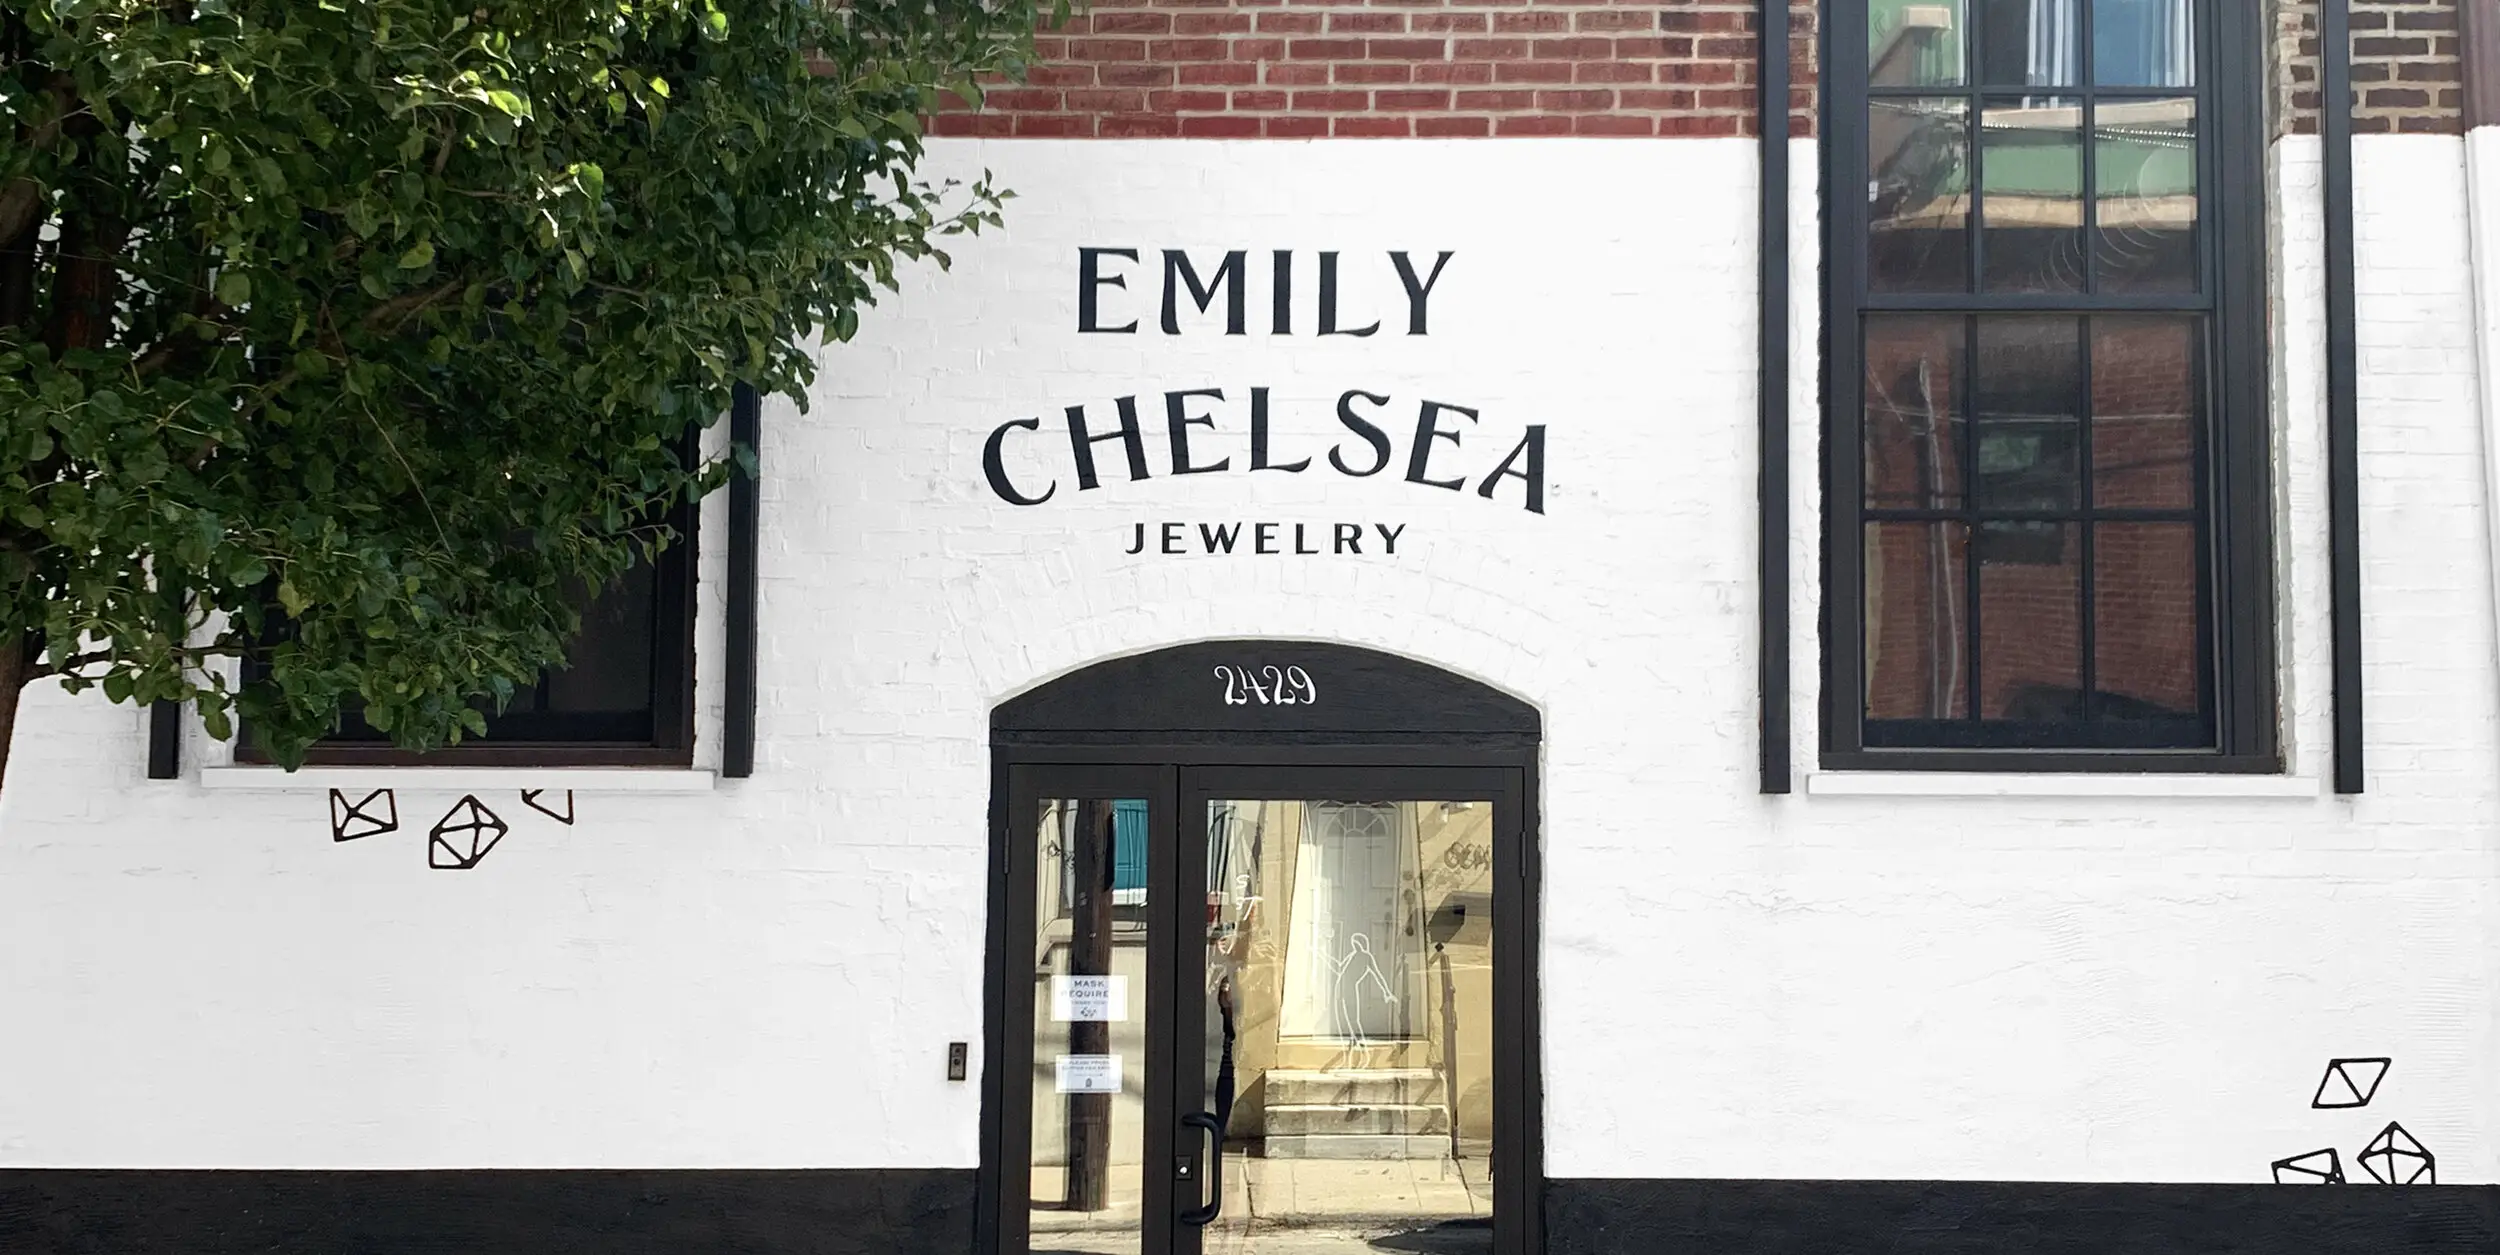 The front entrance of Emily Chelsea Jewelry